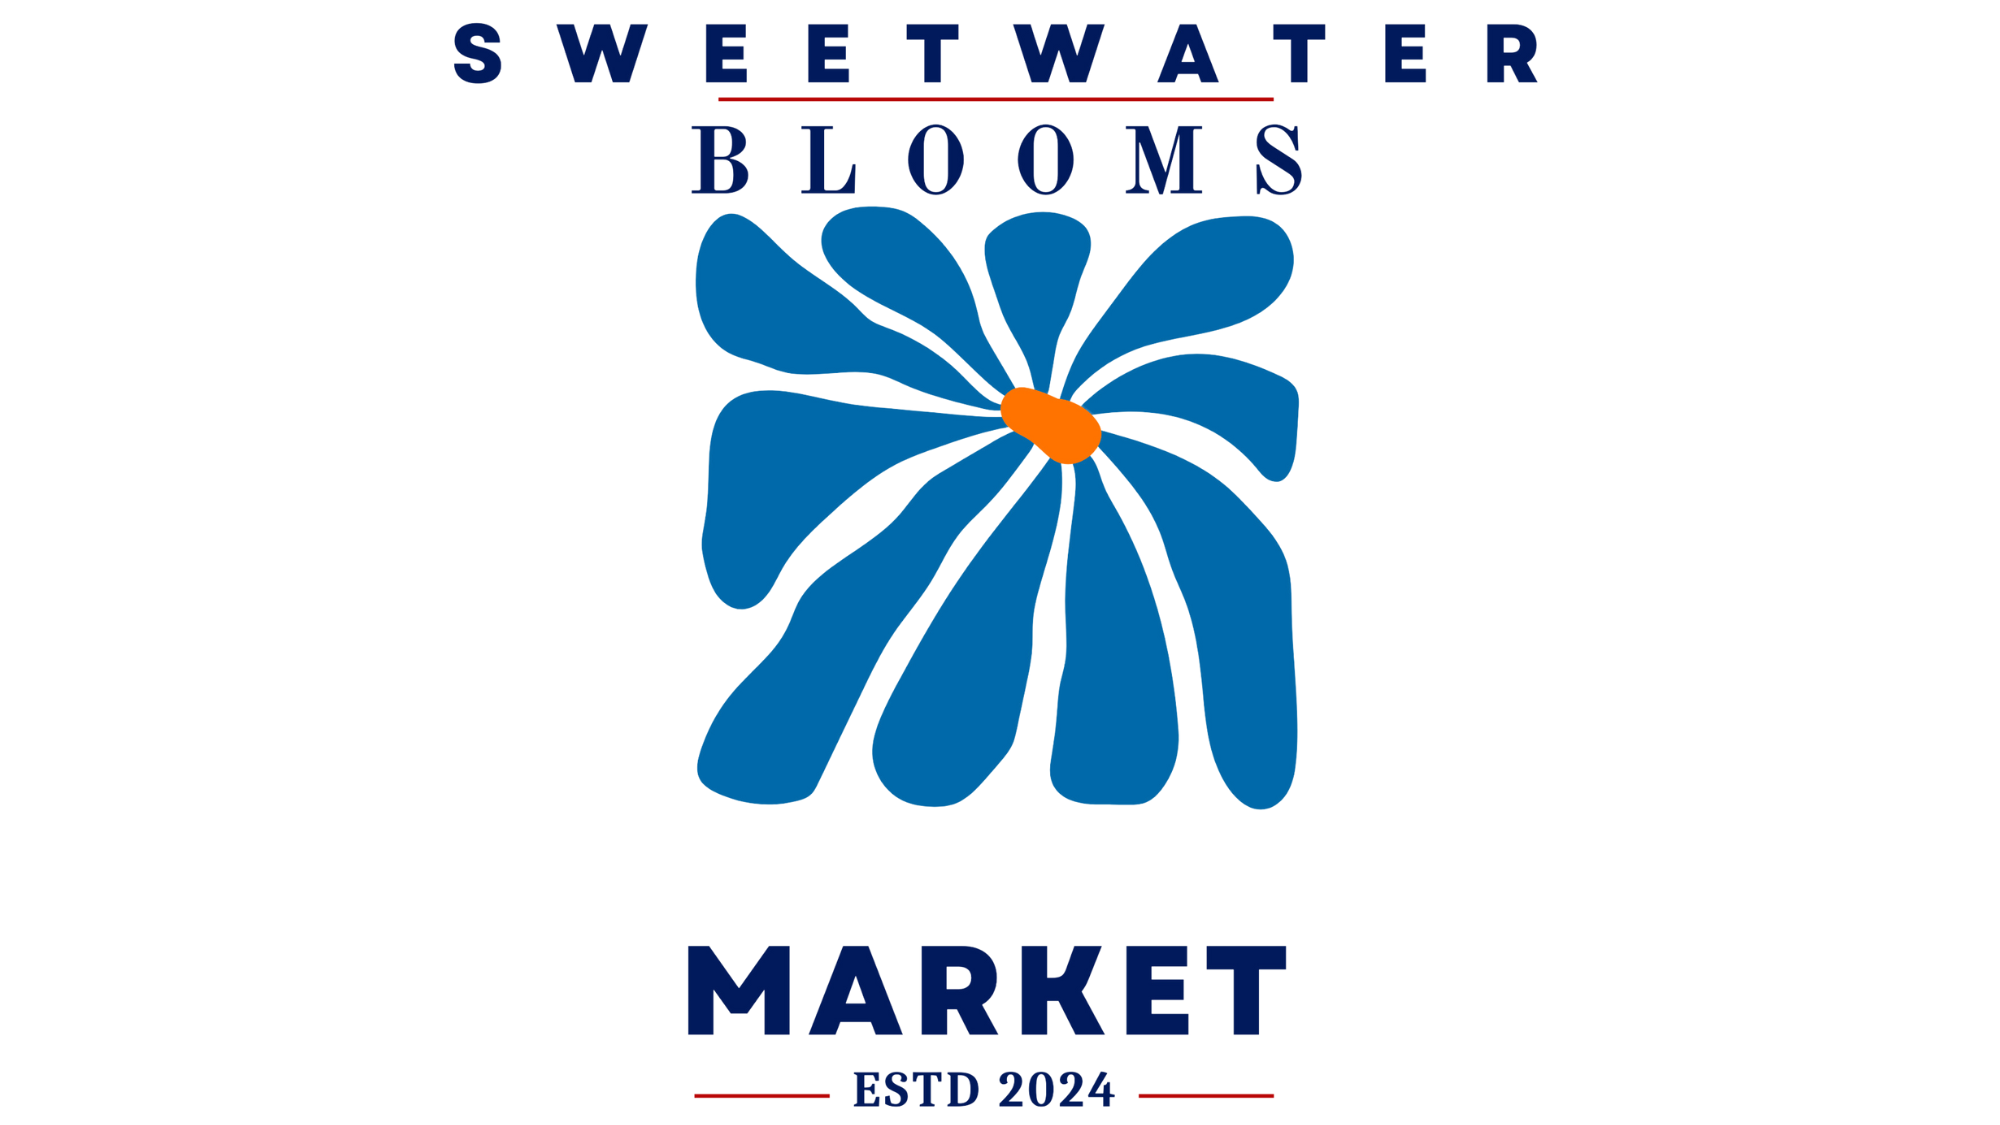 Sweetwater Blooms Market